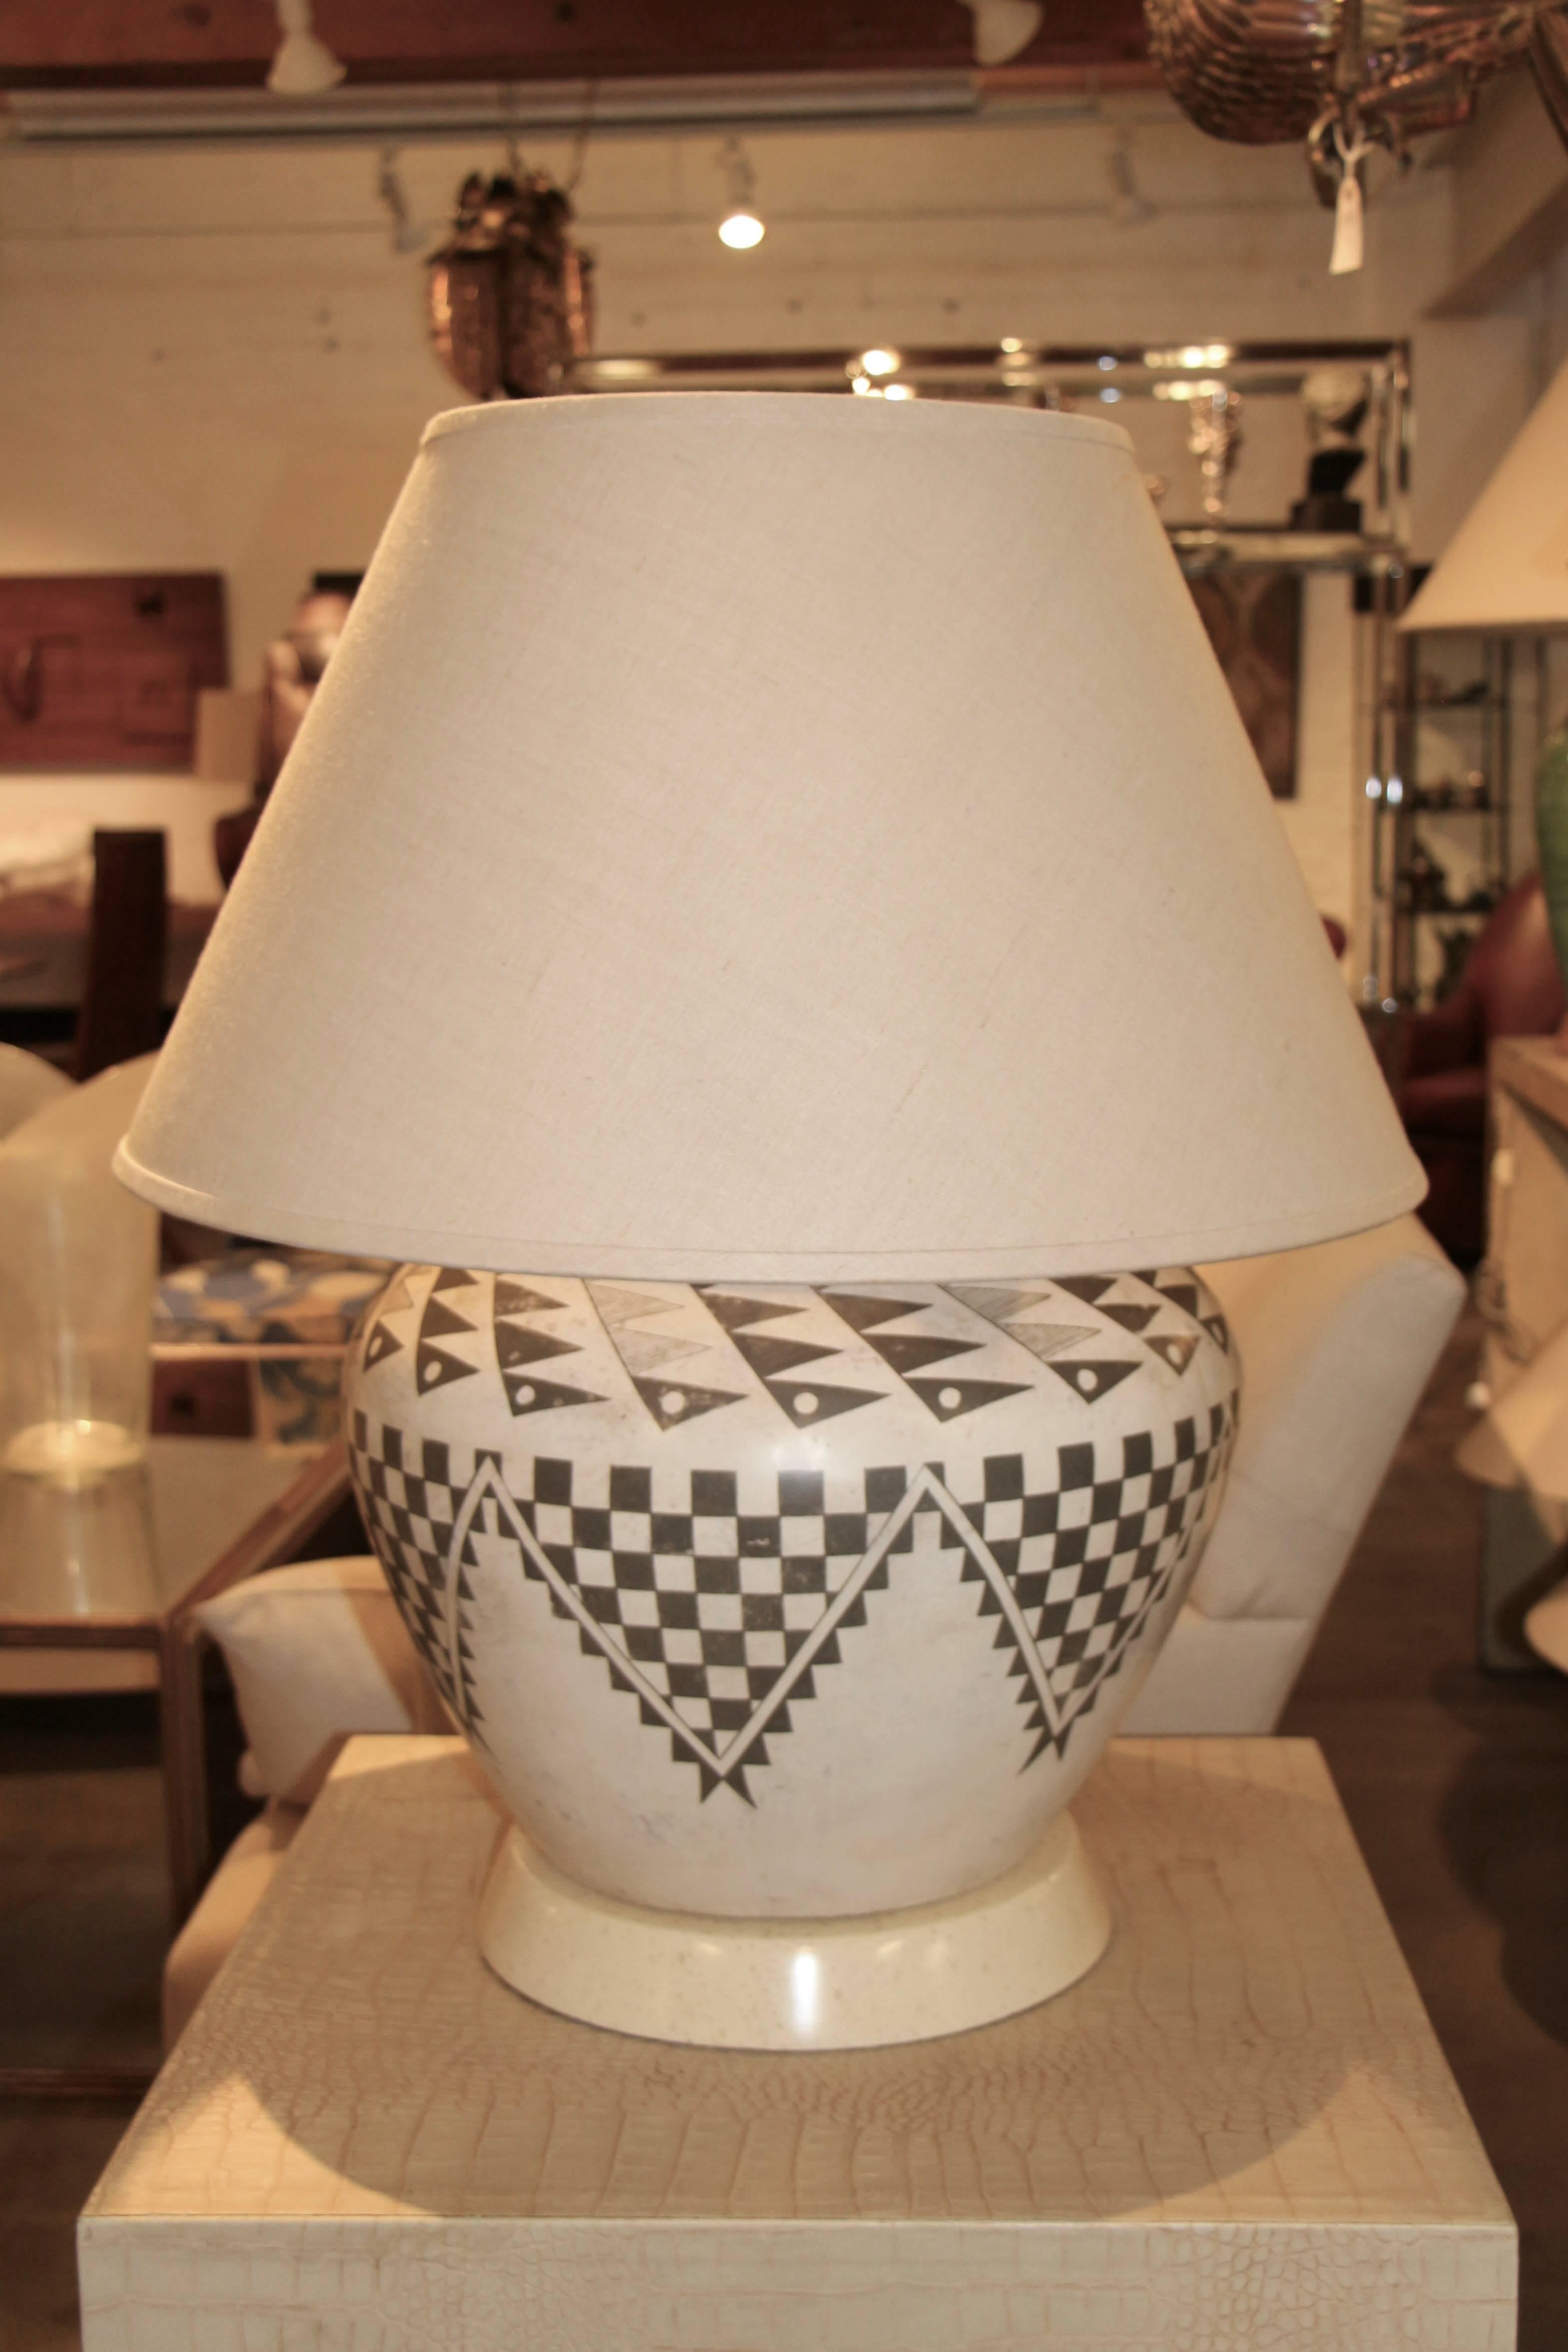 American Large Acoma Pottery by Lucy Lewis Turned into a Lamp by Steve Chase